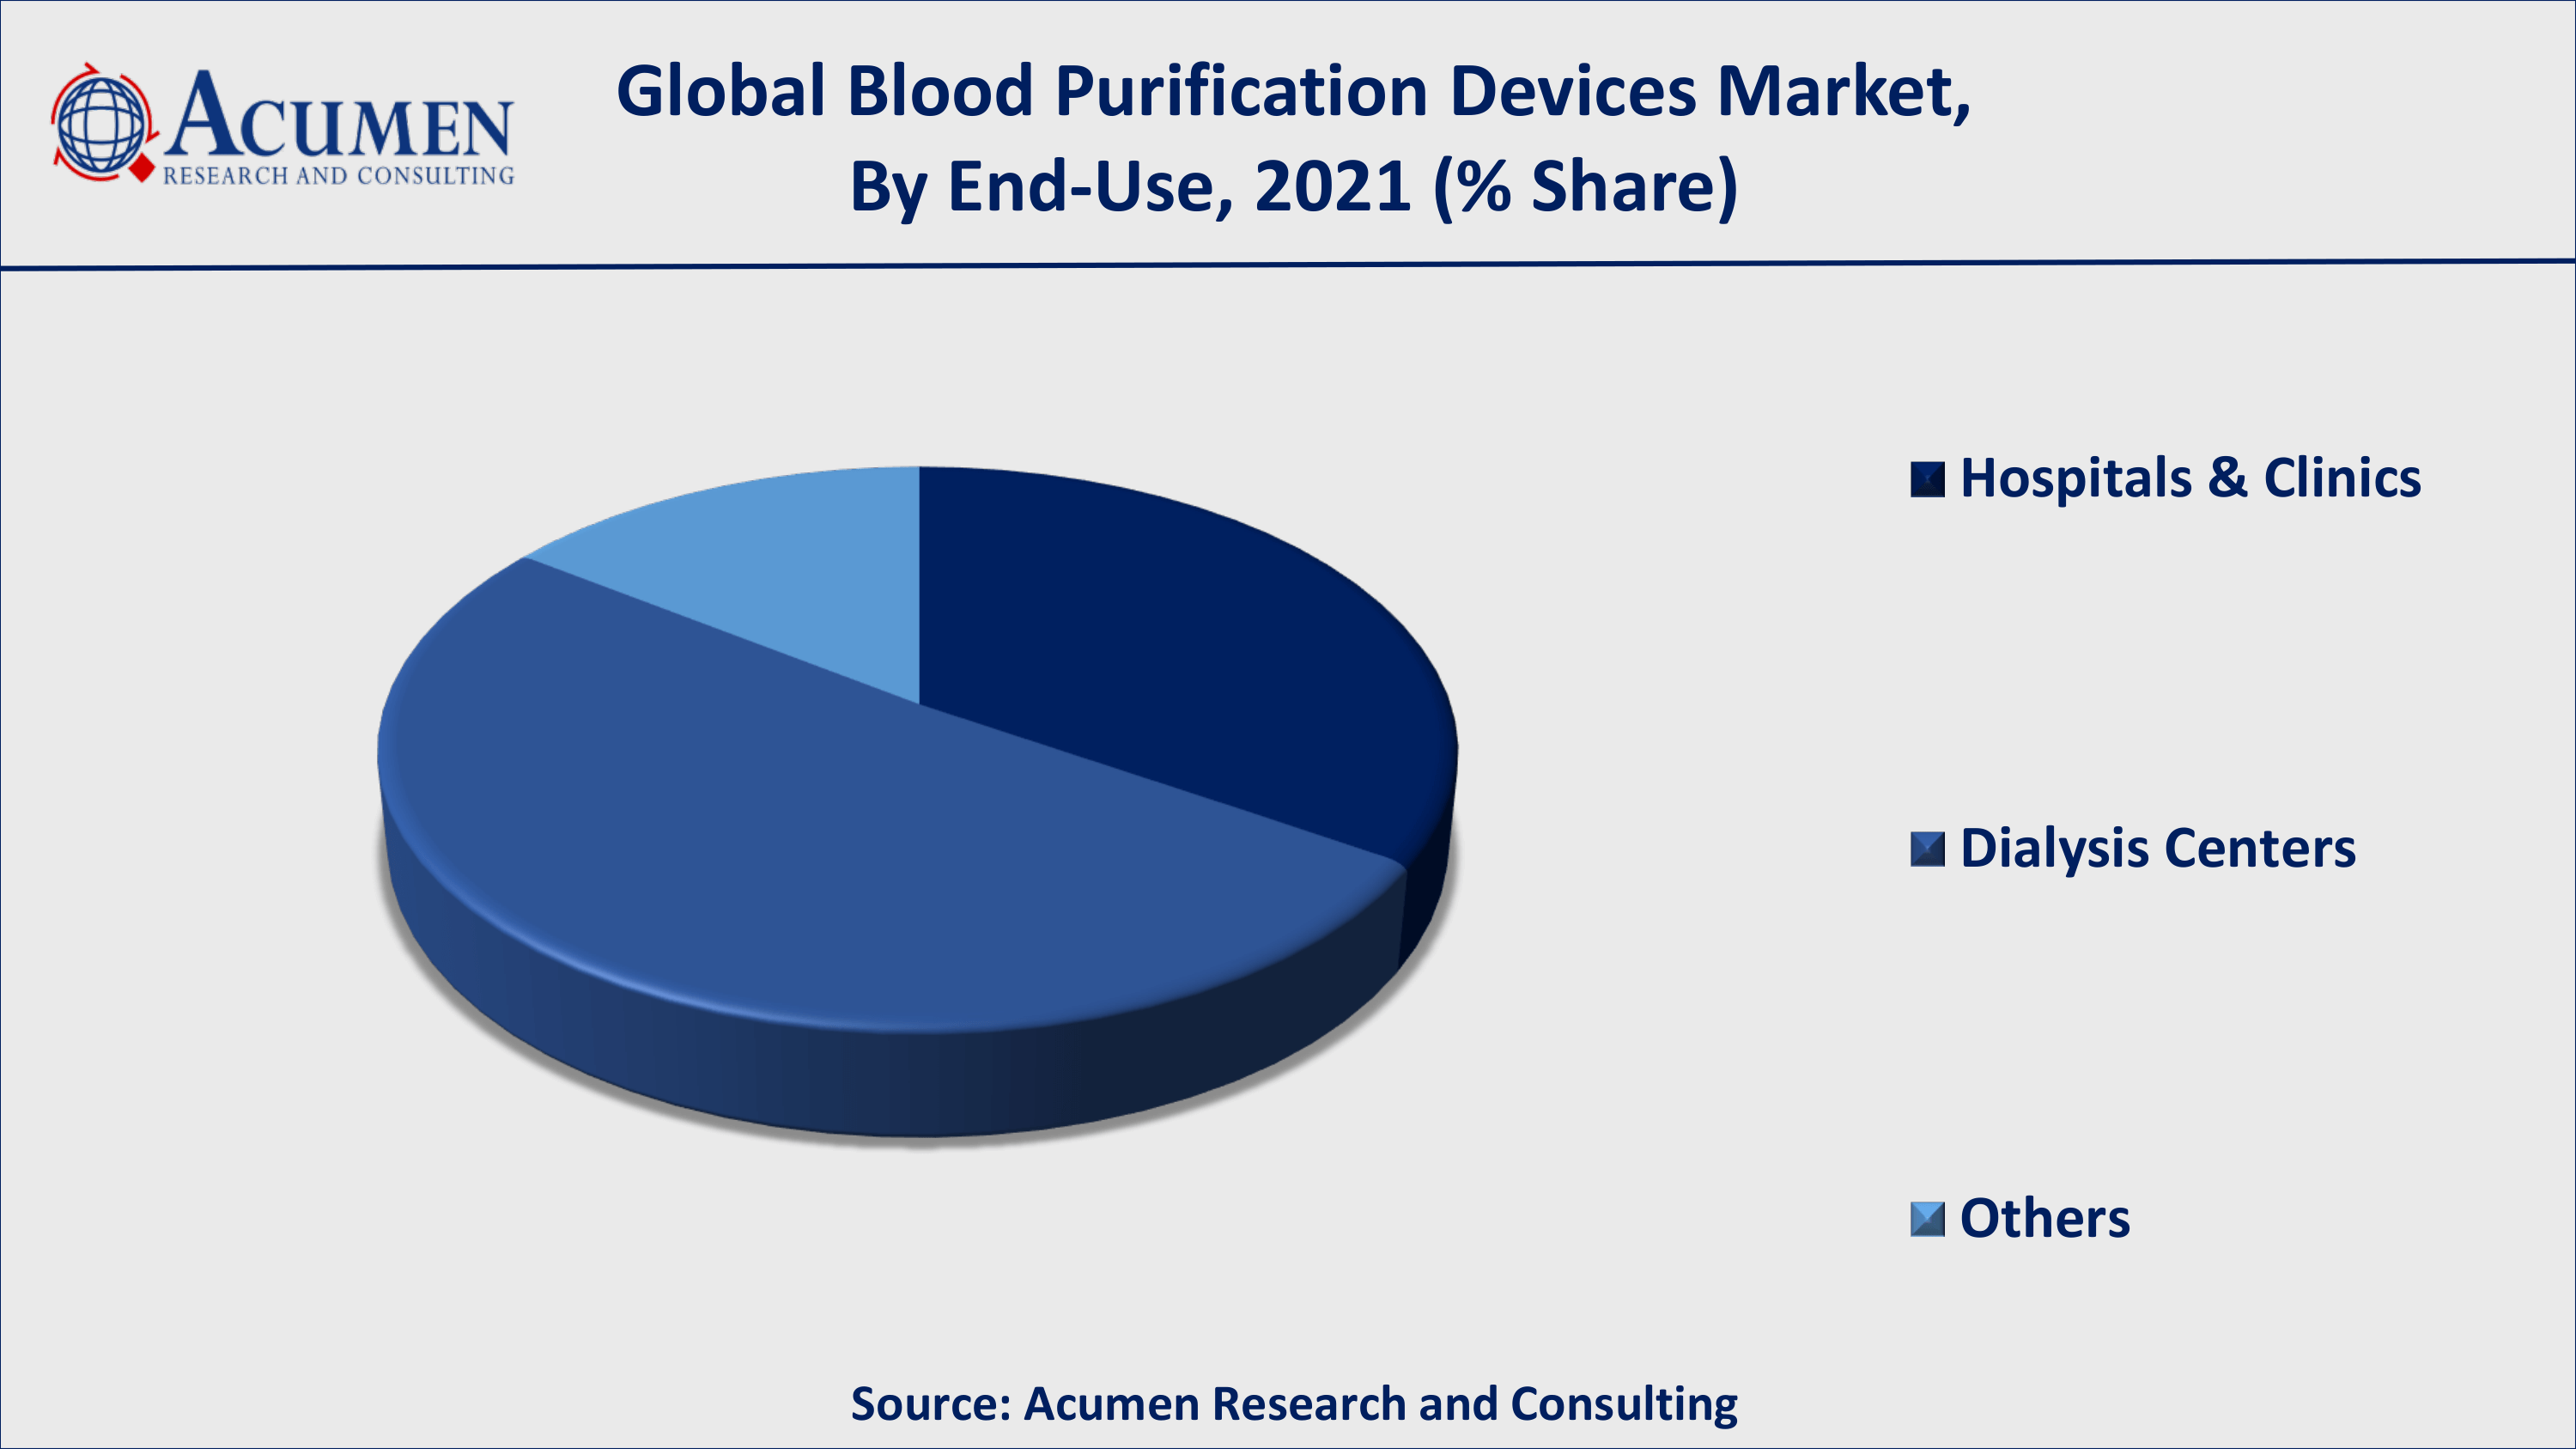 Growing incidence of metabolic disorders will fuel the global blood purification devices market value